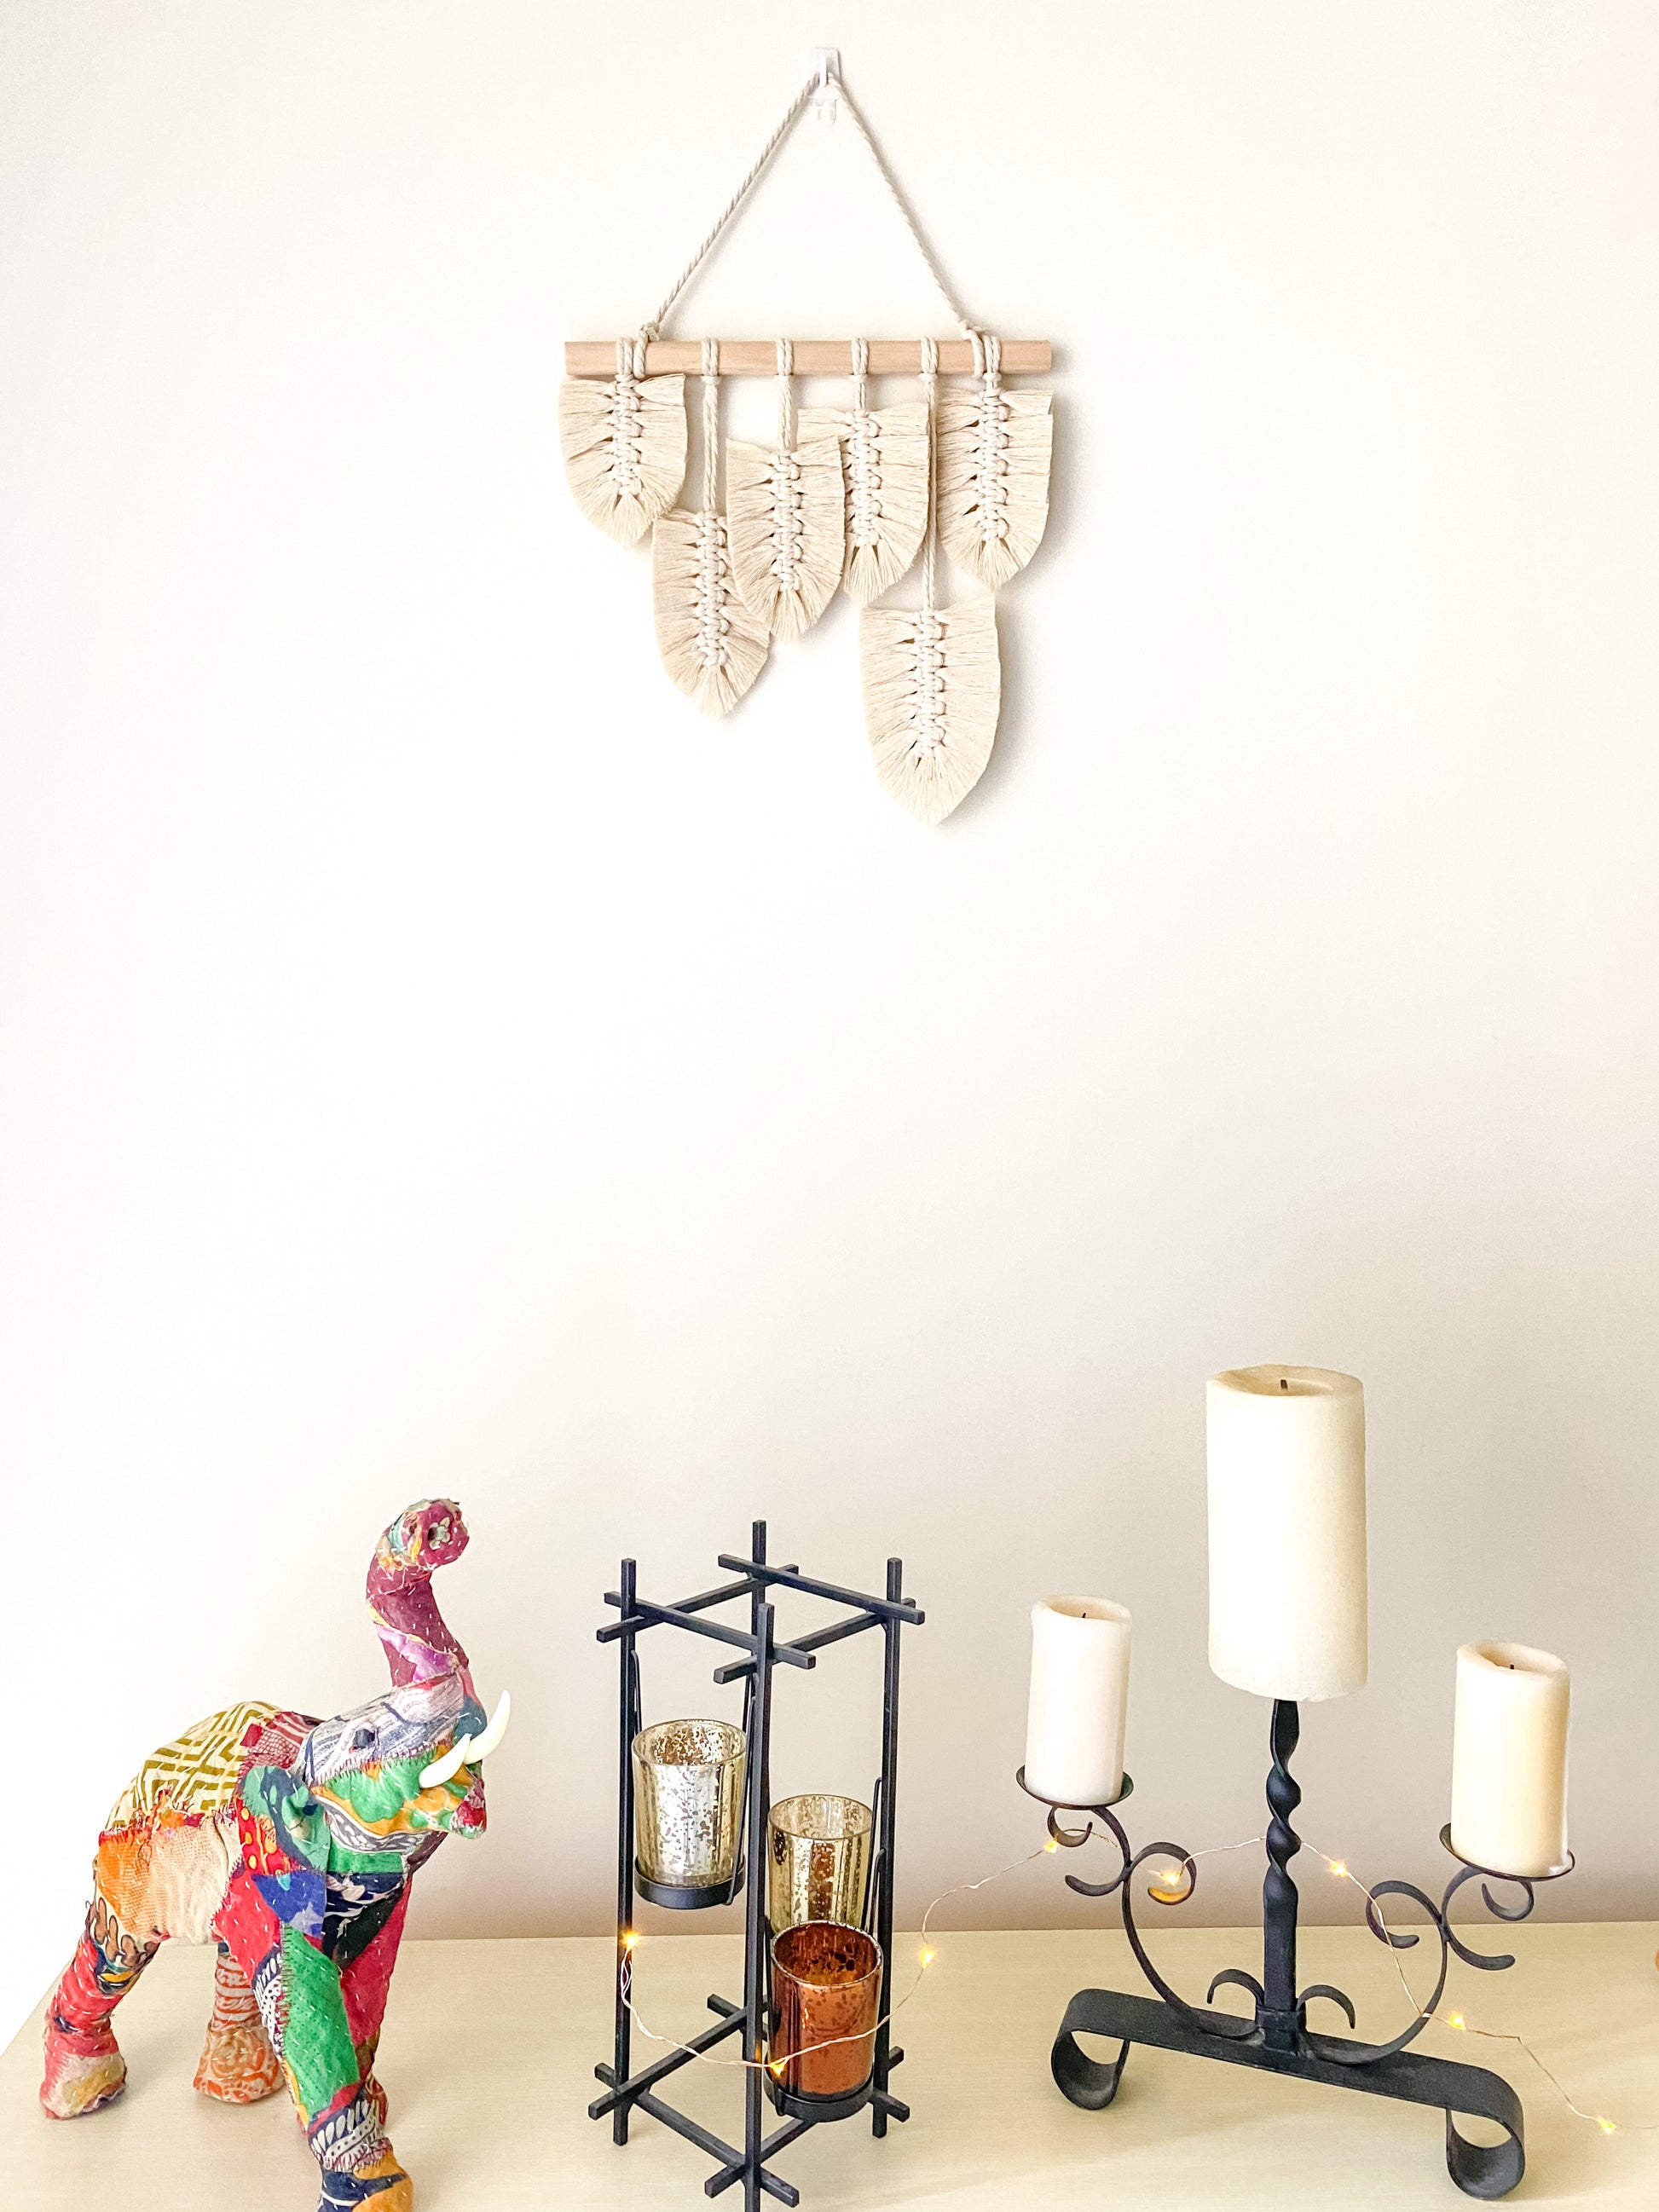 Natural white feather macrame wall hanging hanged on a wall above a side board buffet decorated with two candle holders, fabric elephant and fairy lights. 